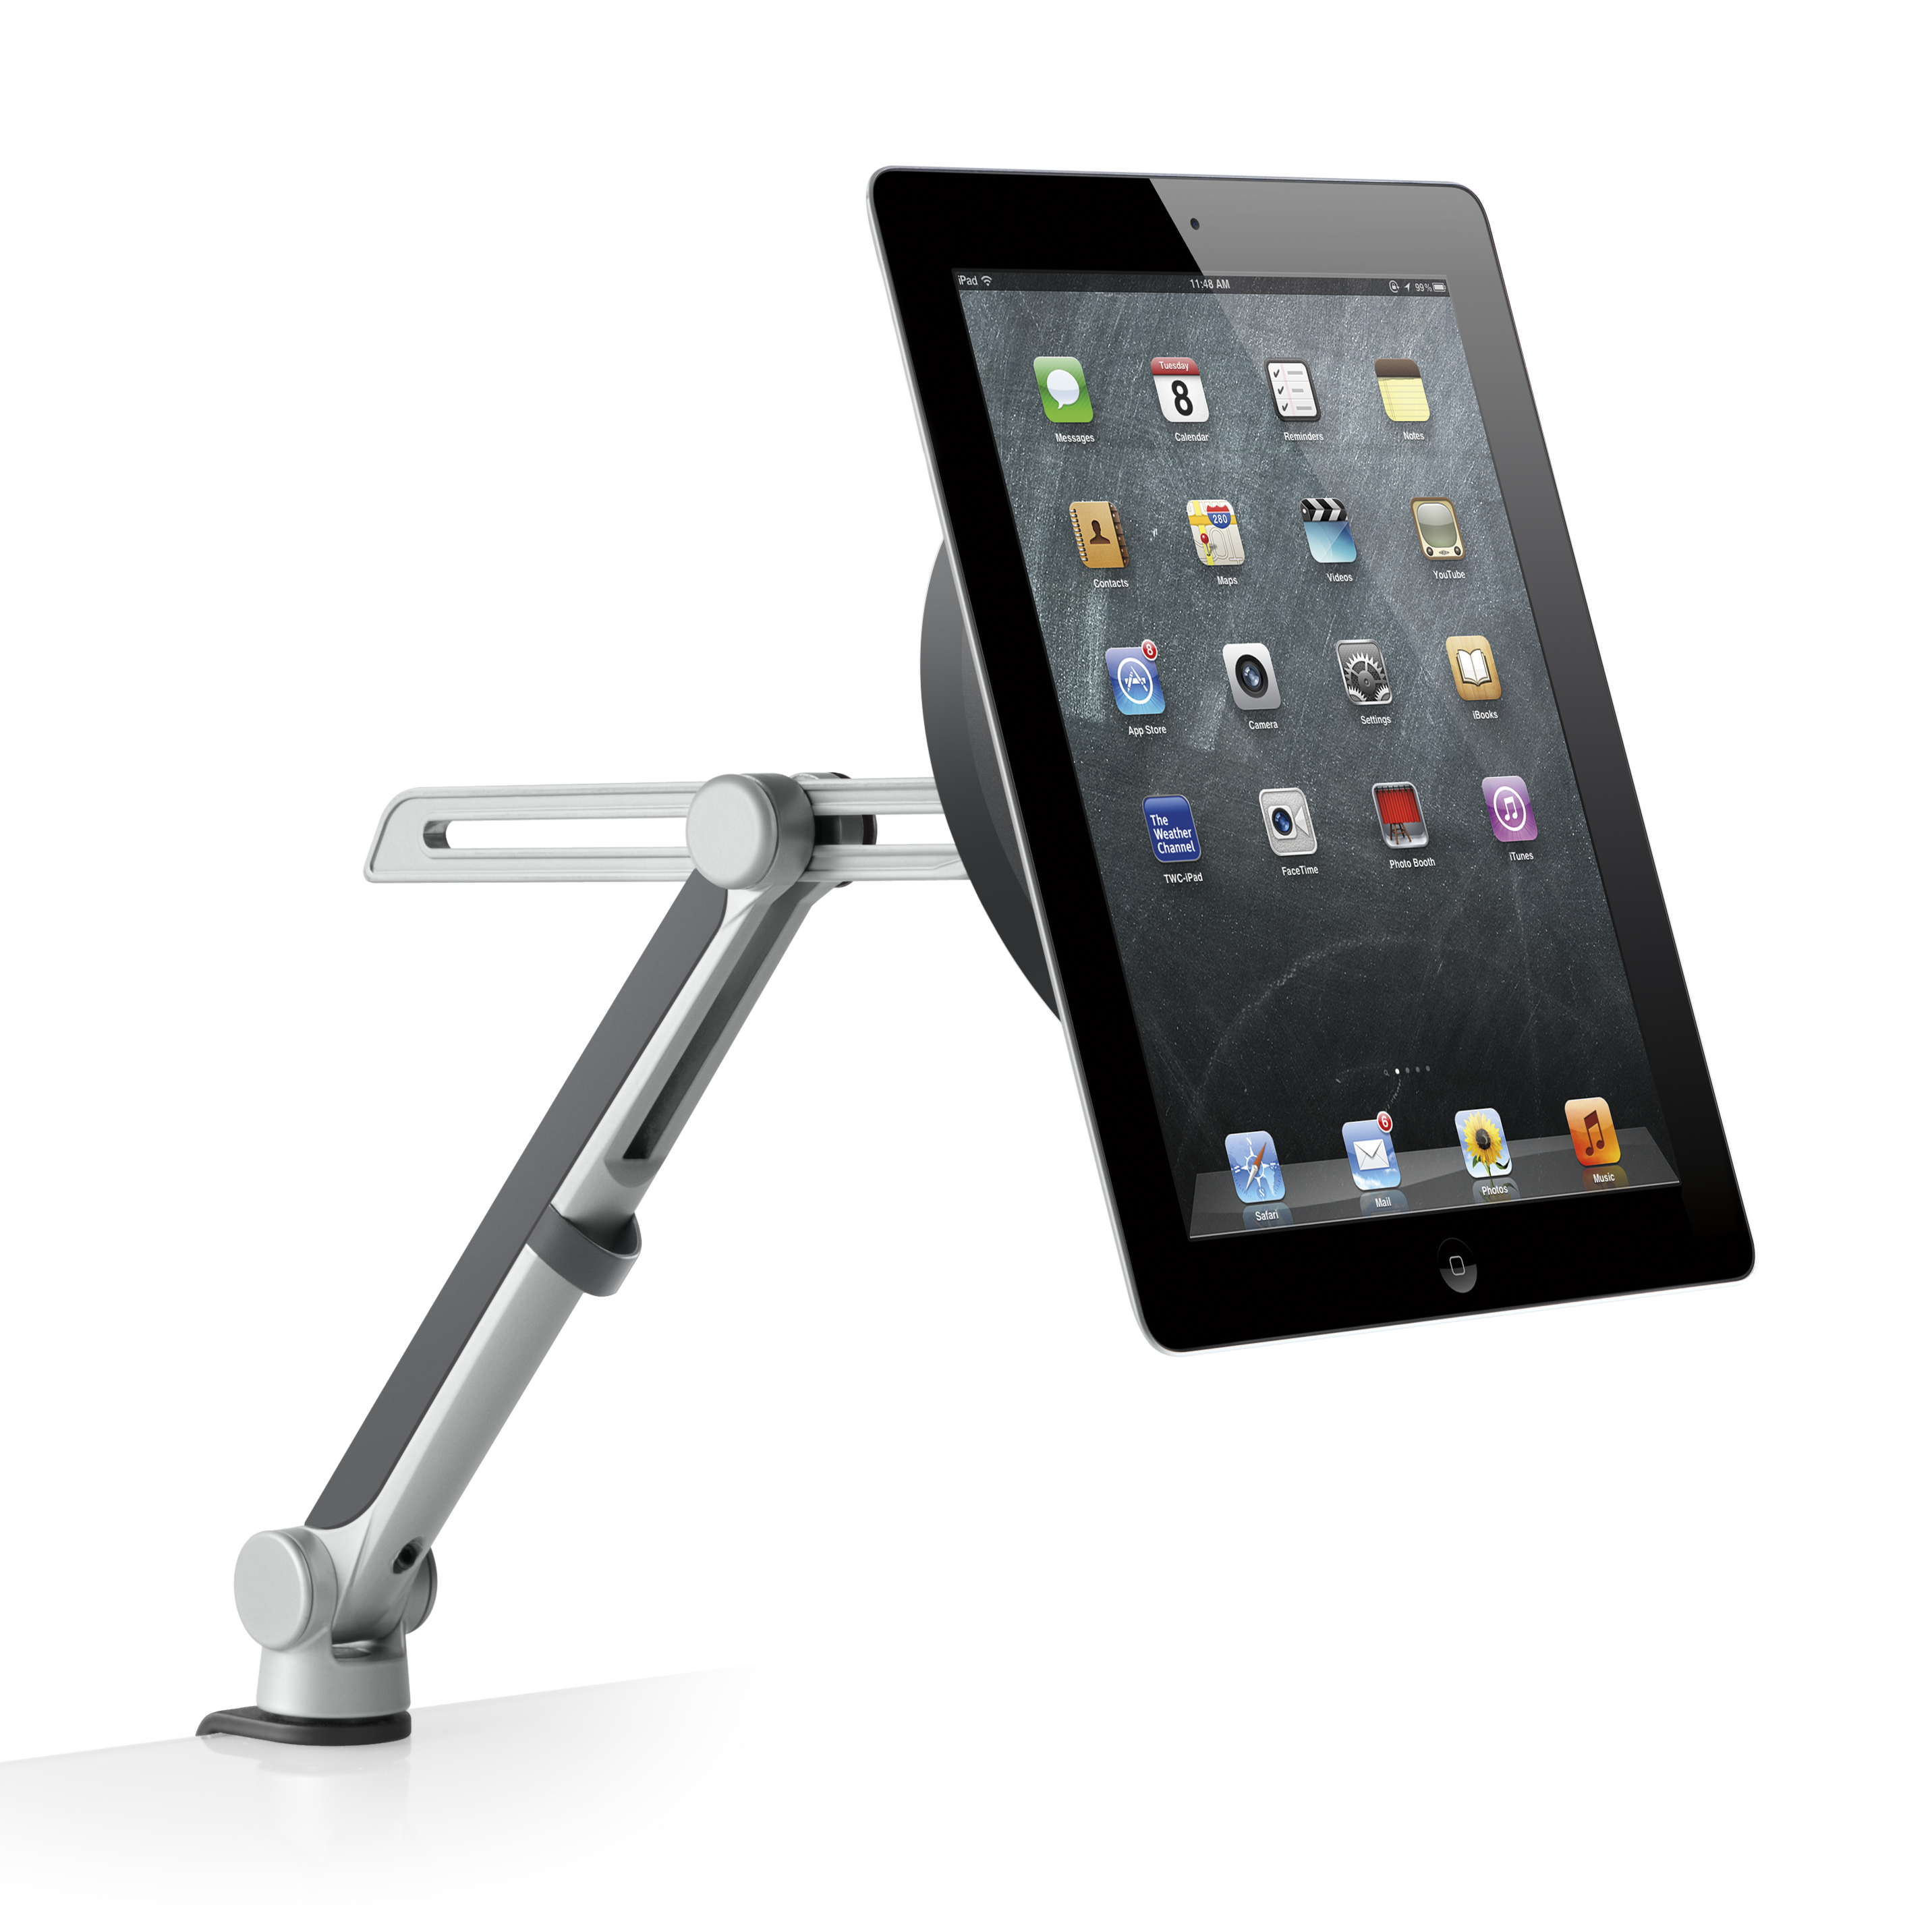 Innovative Office Products is now shipping Tablik - the first purpose-built tablet desk mount arm on the market.